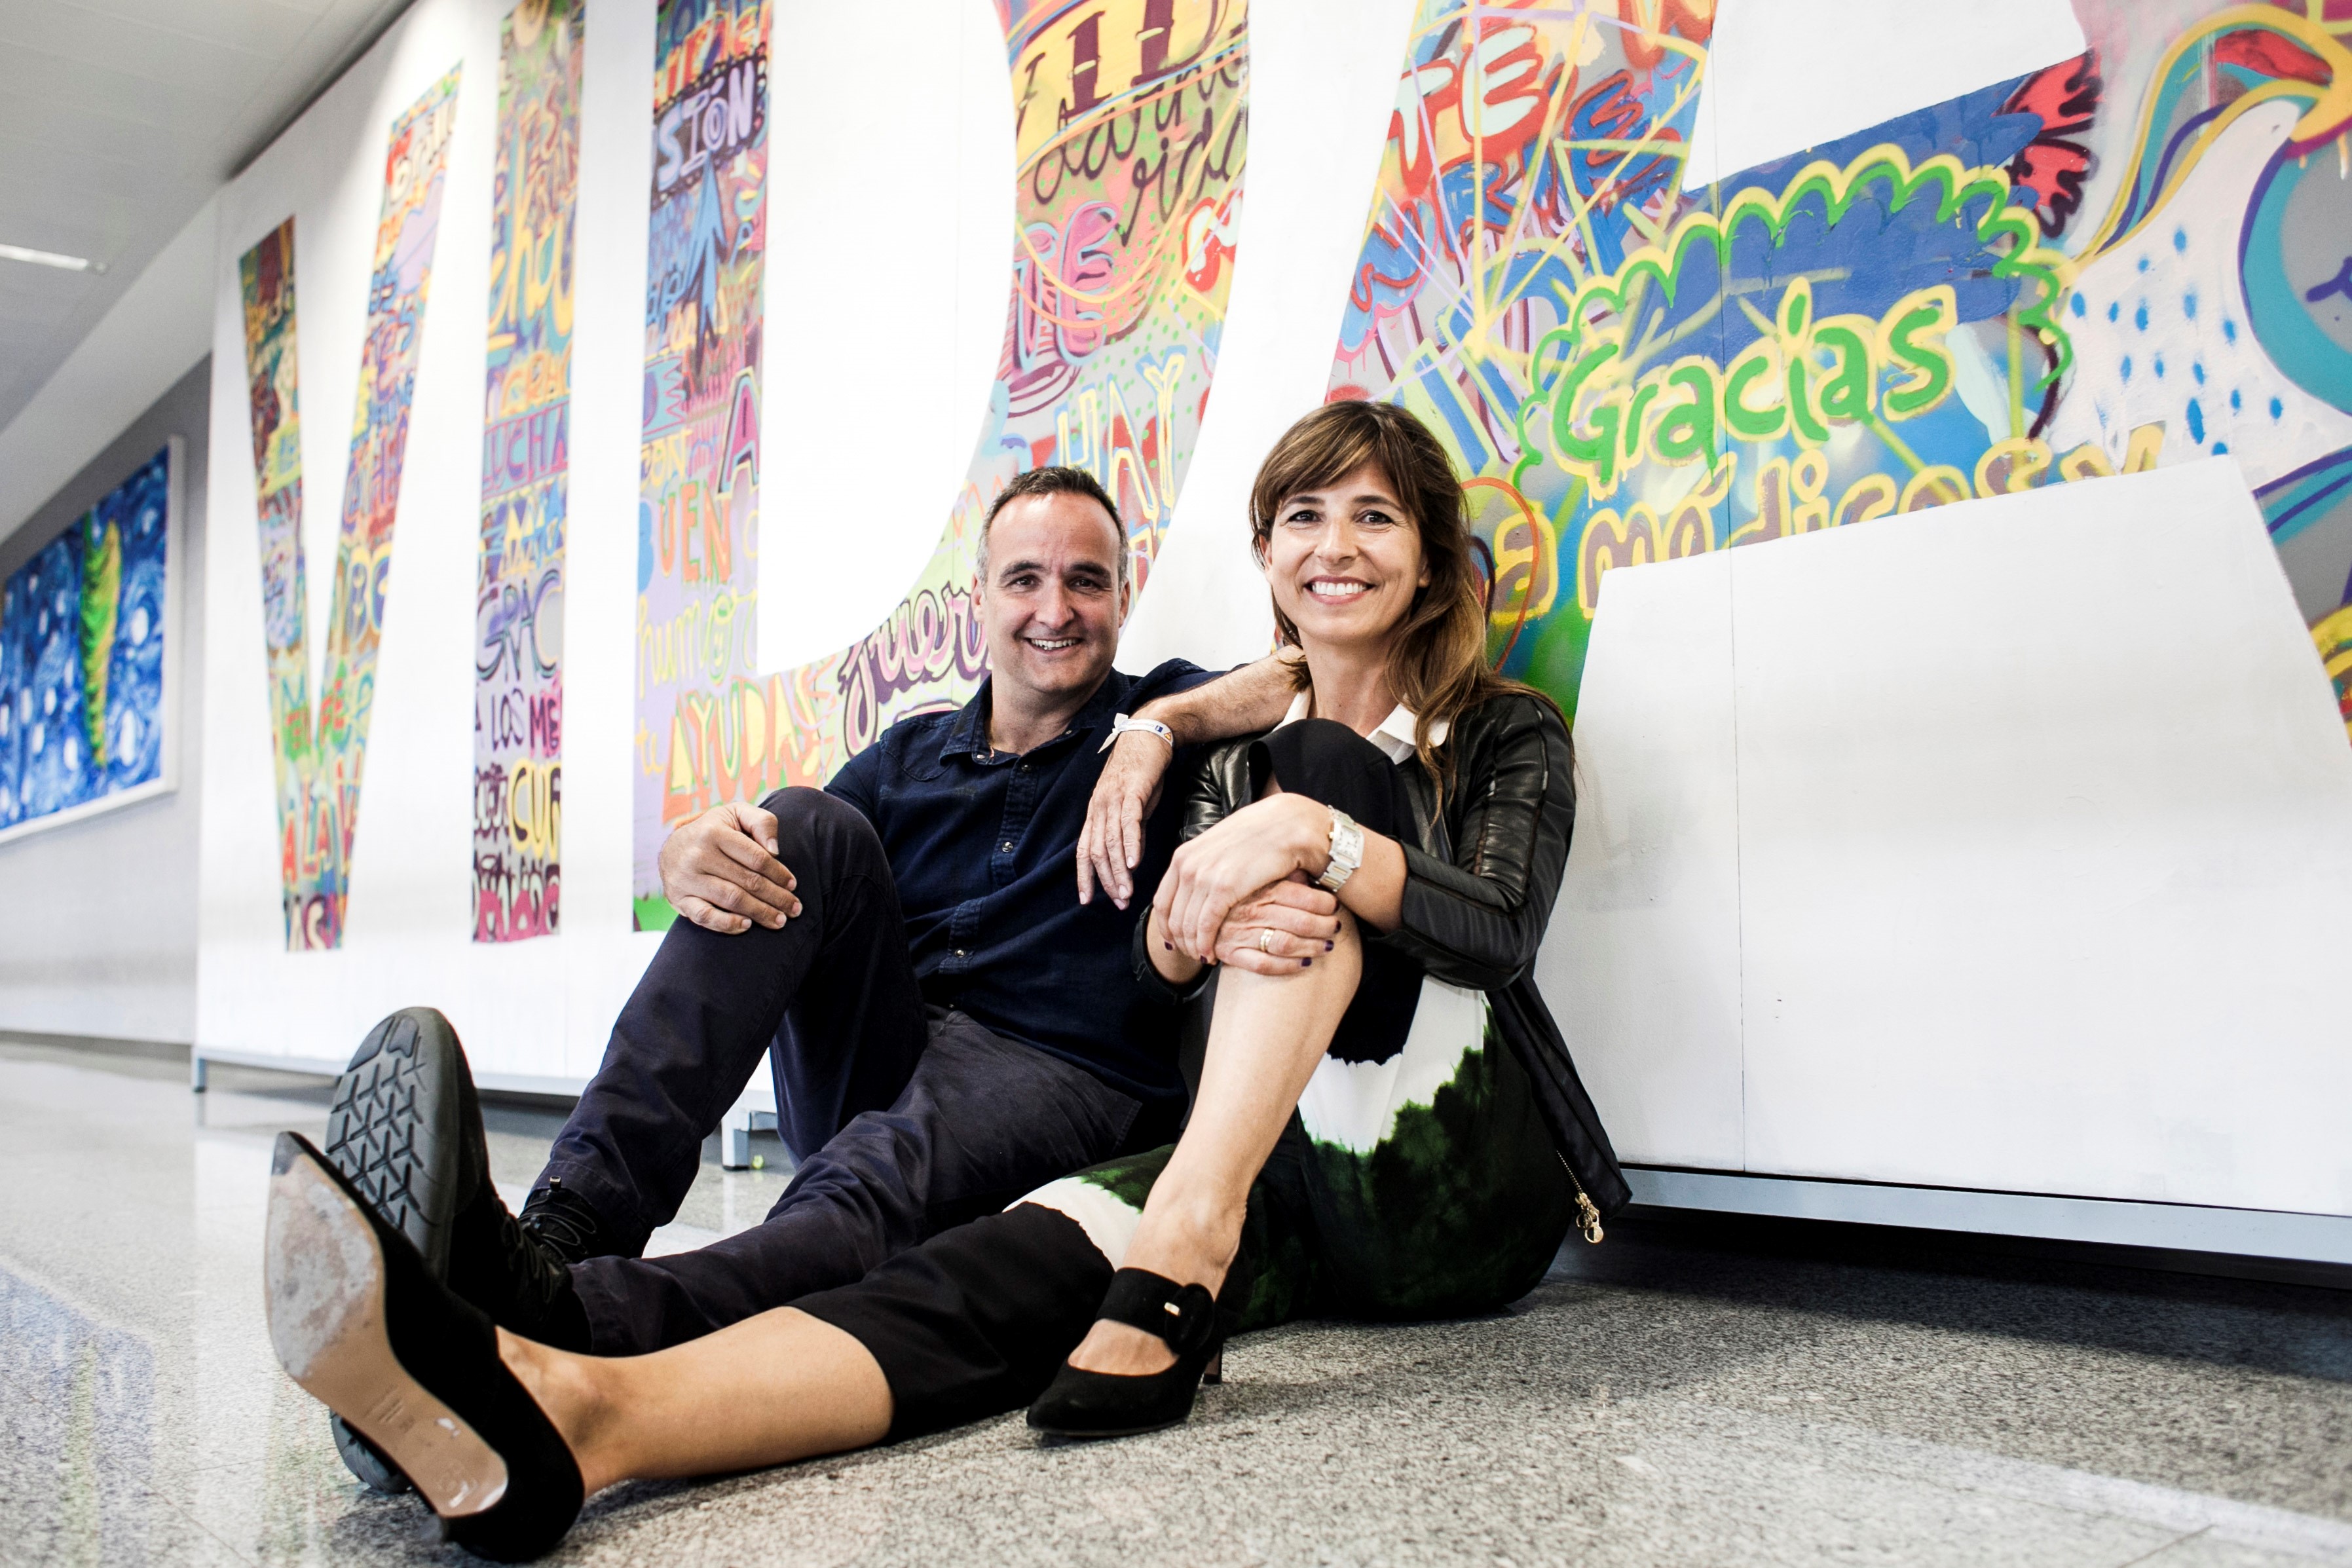 Lola and her husband Diego sit on an art gallery floor next to each other smiling at the camera